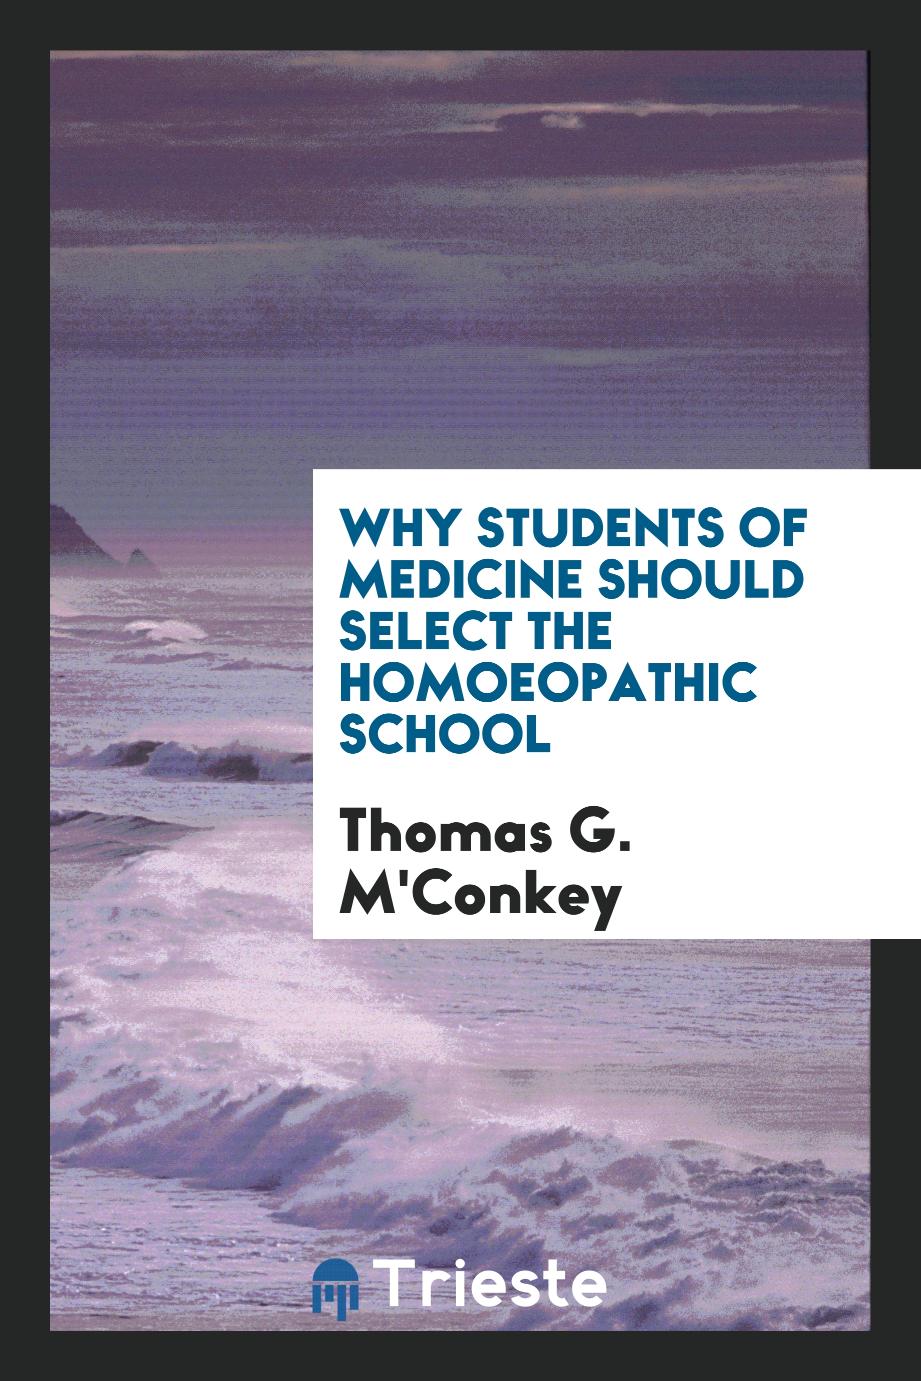 Why students of medicine should select the homoeopathic school